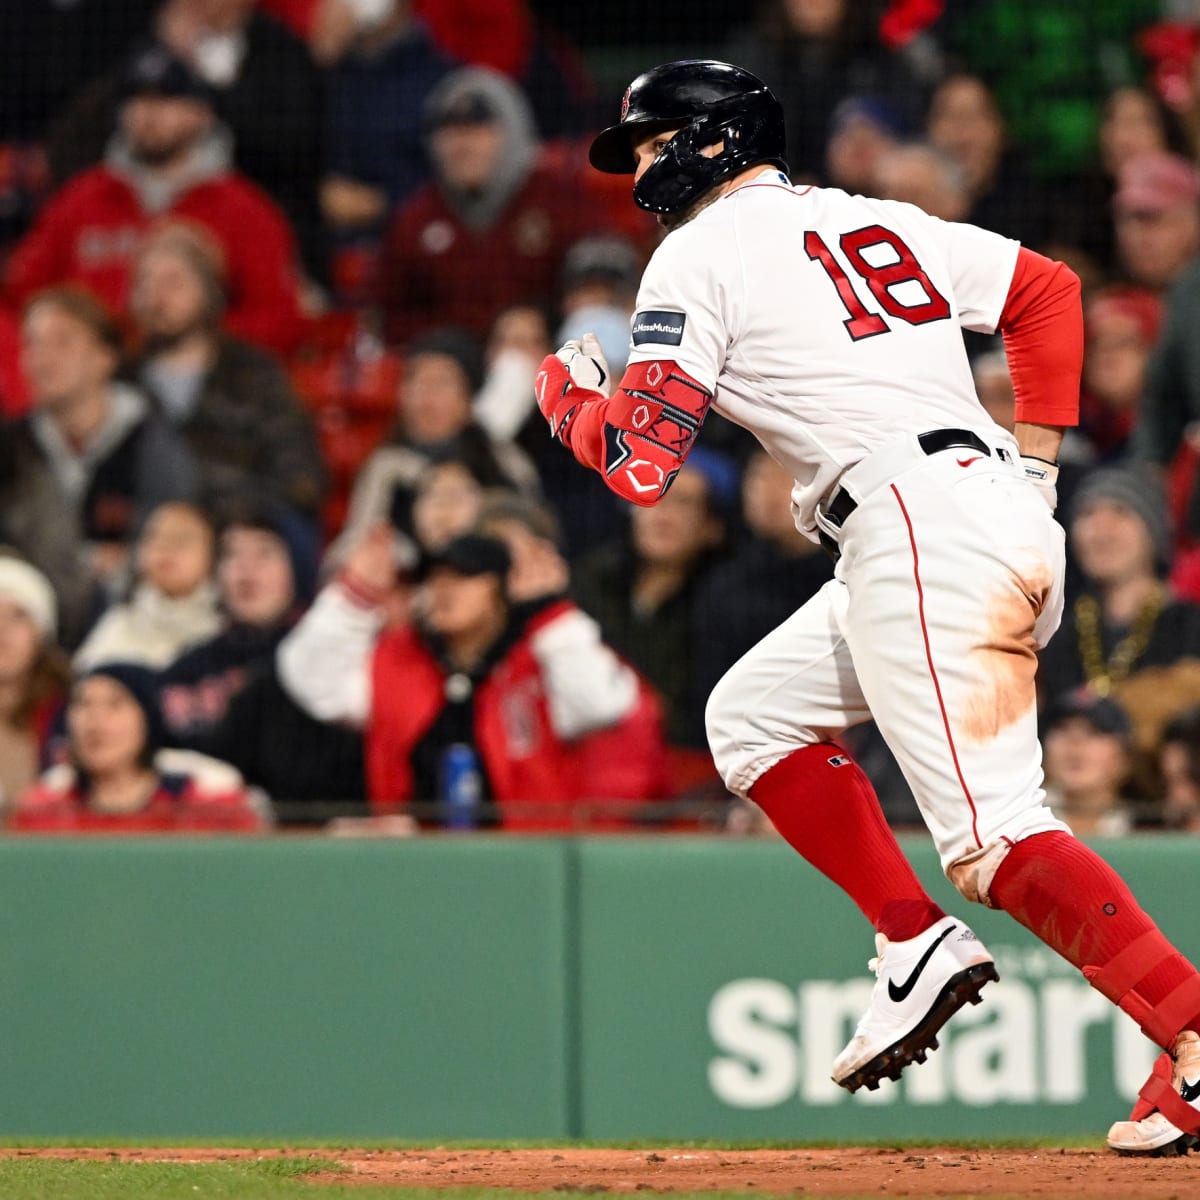 WATCH: Boston Red Sox' Adam Duvall Hits Long Home Run to Give Sox